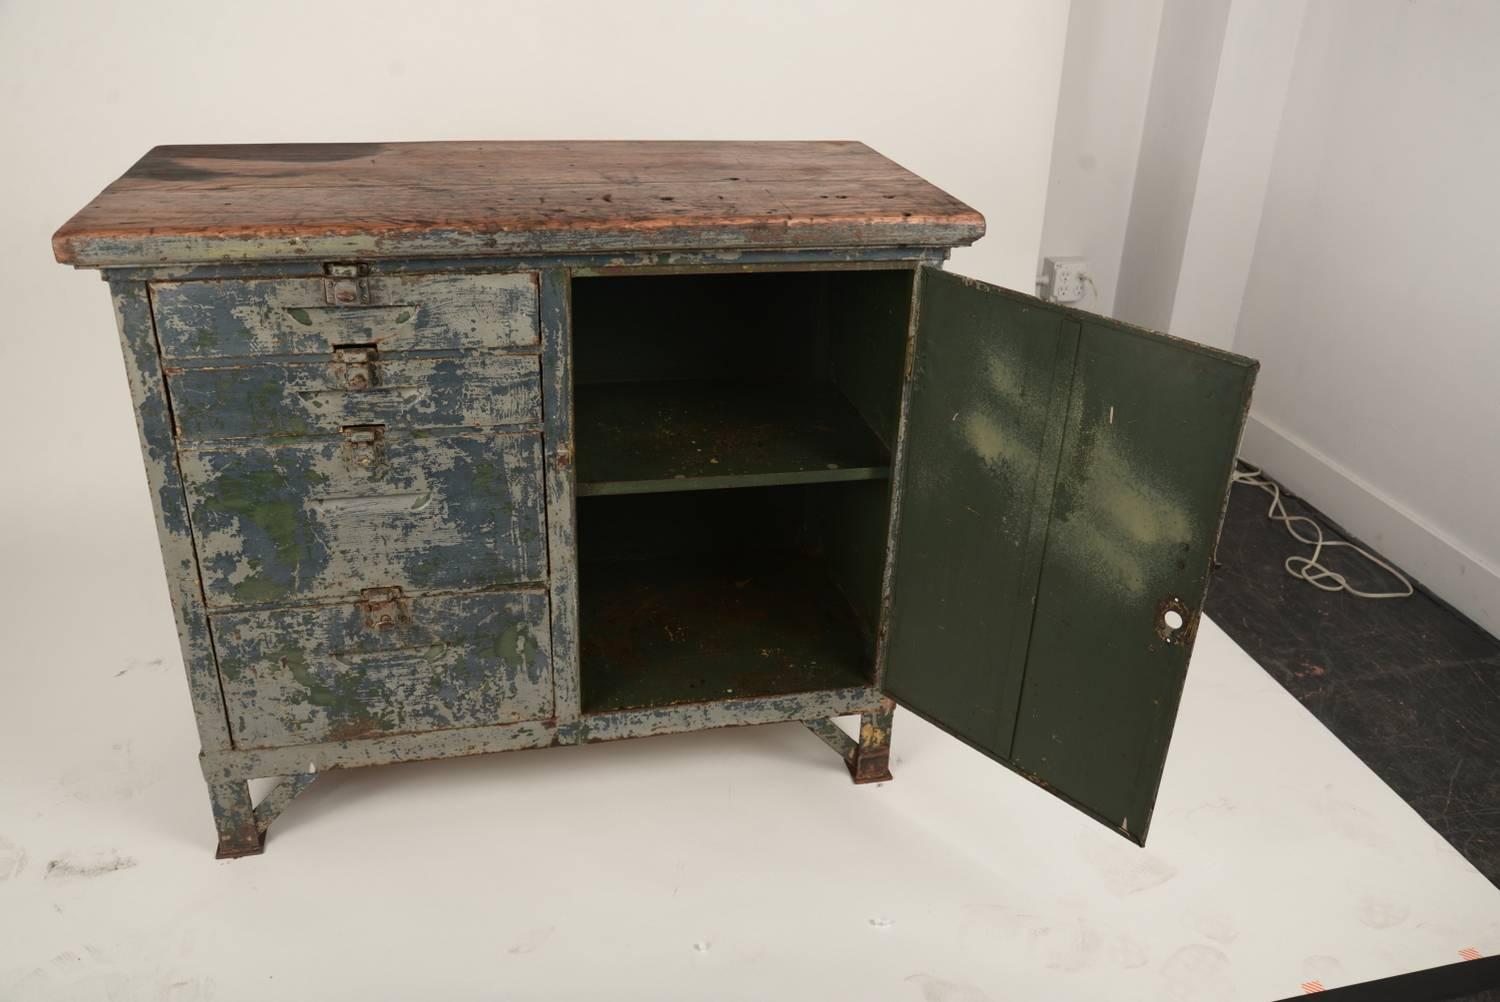 Sturdy stout and very clean this steel cabinet with an oak top as remnants of it's original blue greenish gray paint. The dark area on the top is evidence of a fire. The entire piece has been thoroughly cleaned and sealed and is ready to enjoy in